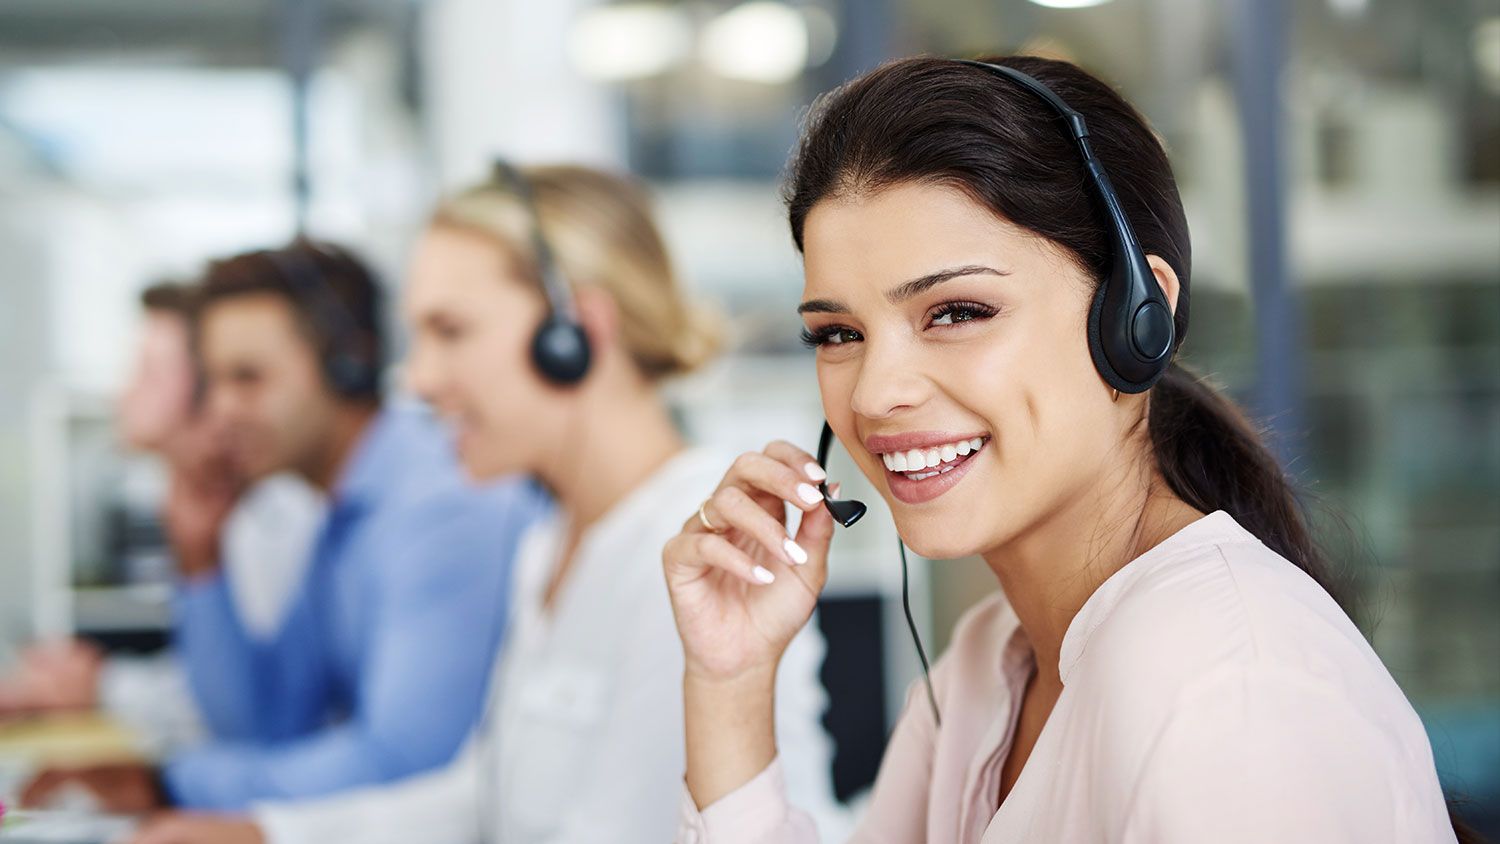 What are the Different Types of Customer Service Roles?